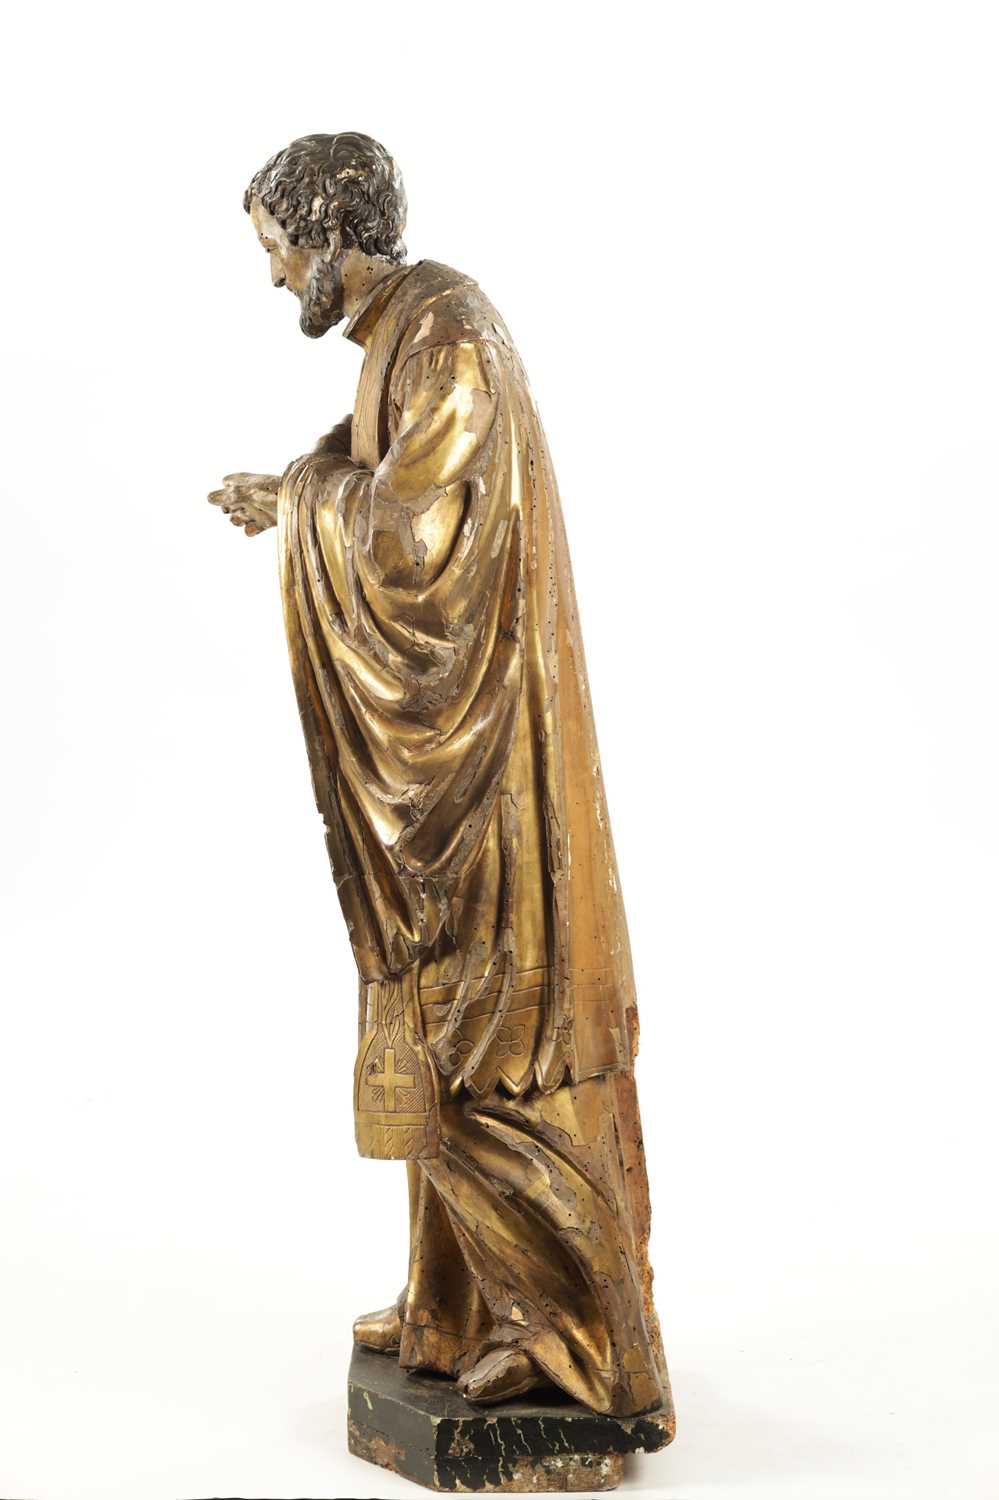 AN EARLY 17TH CENTURY CARVED WOOD GILT GESSO FIGURE OF CHRIST - Image 5 of 6